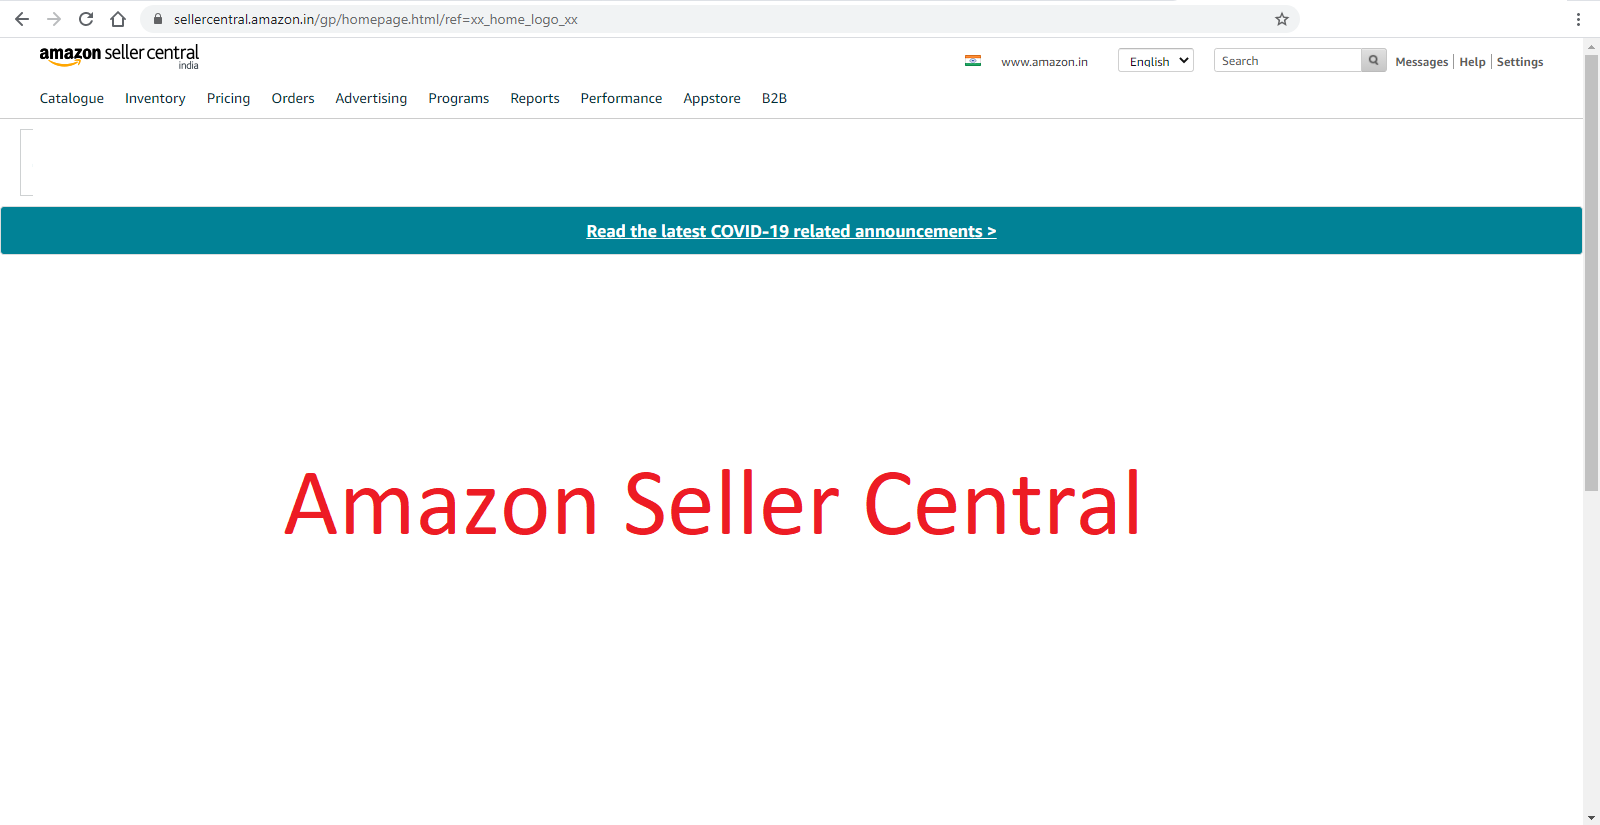 How To Contact Amazon Seller Support, Contact Amazon Seller Support, contact amazon seller support india, contact amazon seller support phone number, amazon seller support associate, amazon seller support contact number india, seller support, seller support amazon, amazon seller central, amazon seller central support, amazon seller central contact number